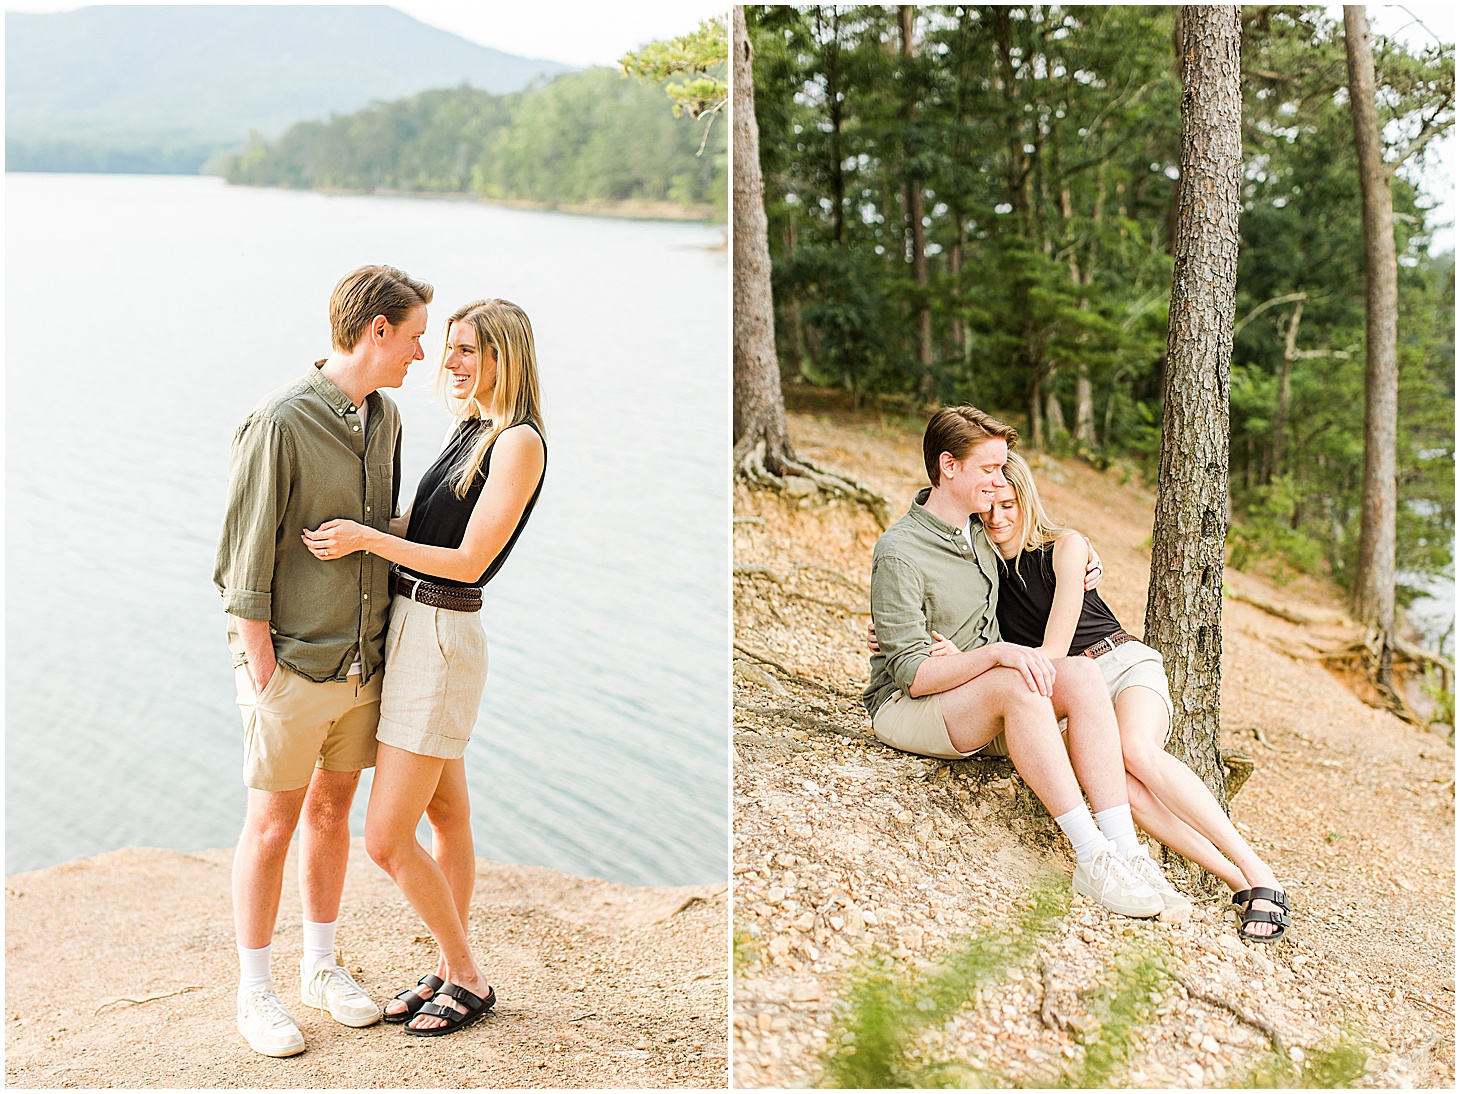 carvinscove_roanokeengagementsession_virginiaweddingphotographer_vaweddingphotographer_photo_0002-1.jpg